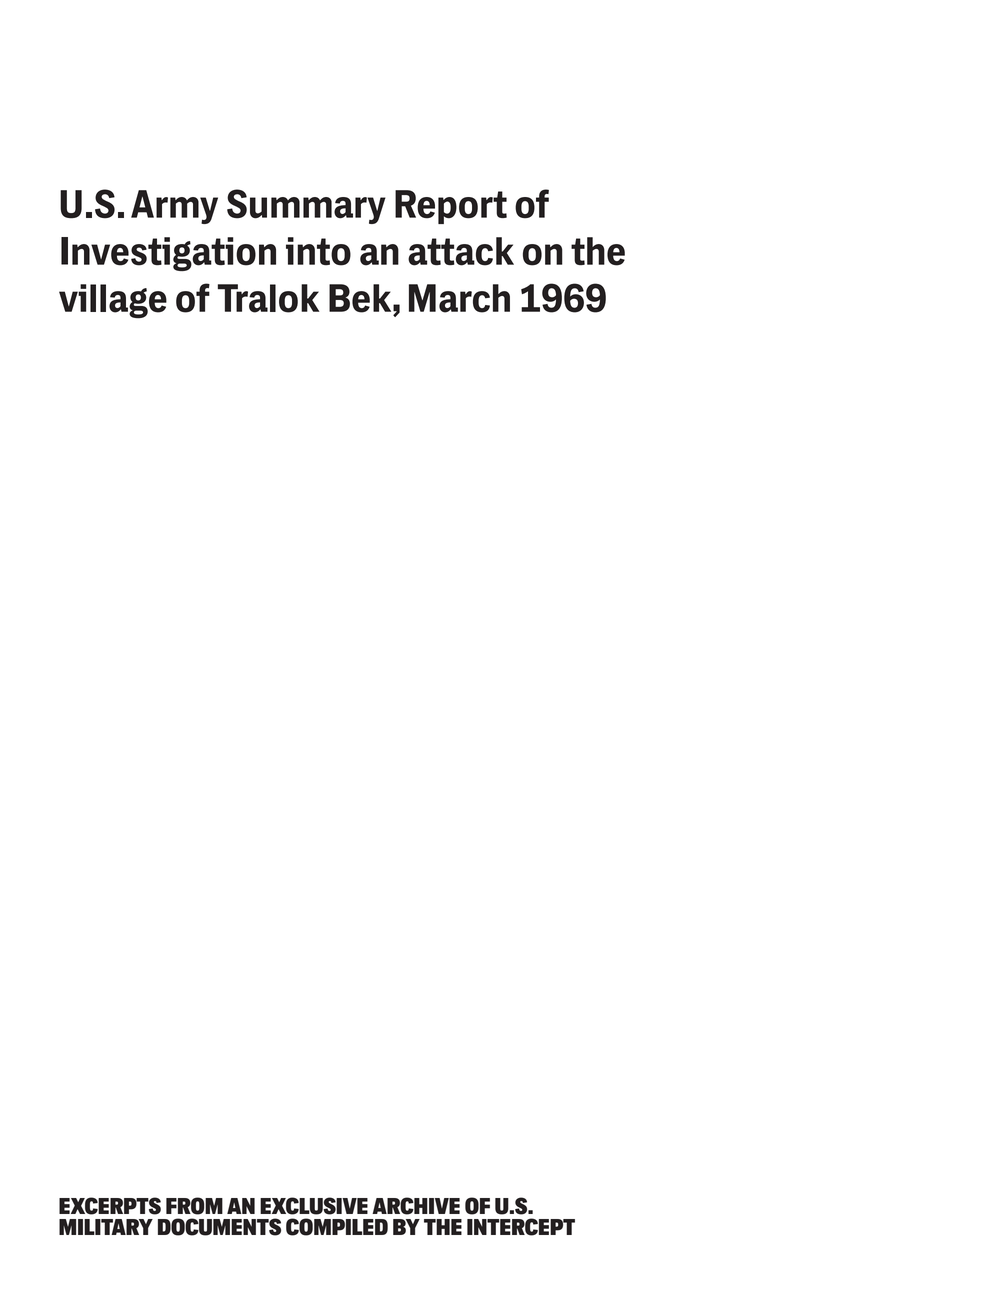 Page 18 from Excerpts-From-An-Exclusive-Archive-Of-US-Military-Documents-Compiled-by-The Intercept